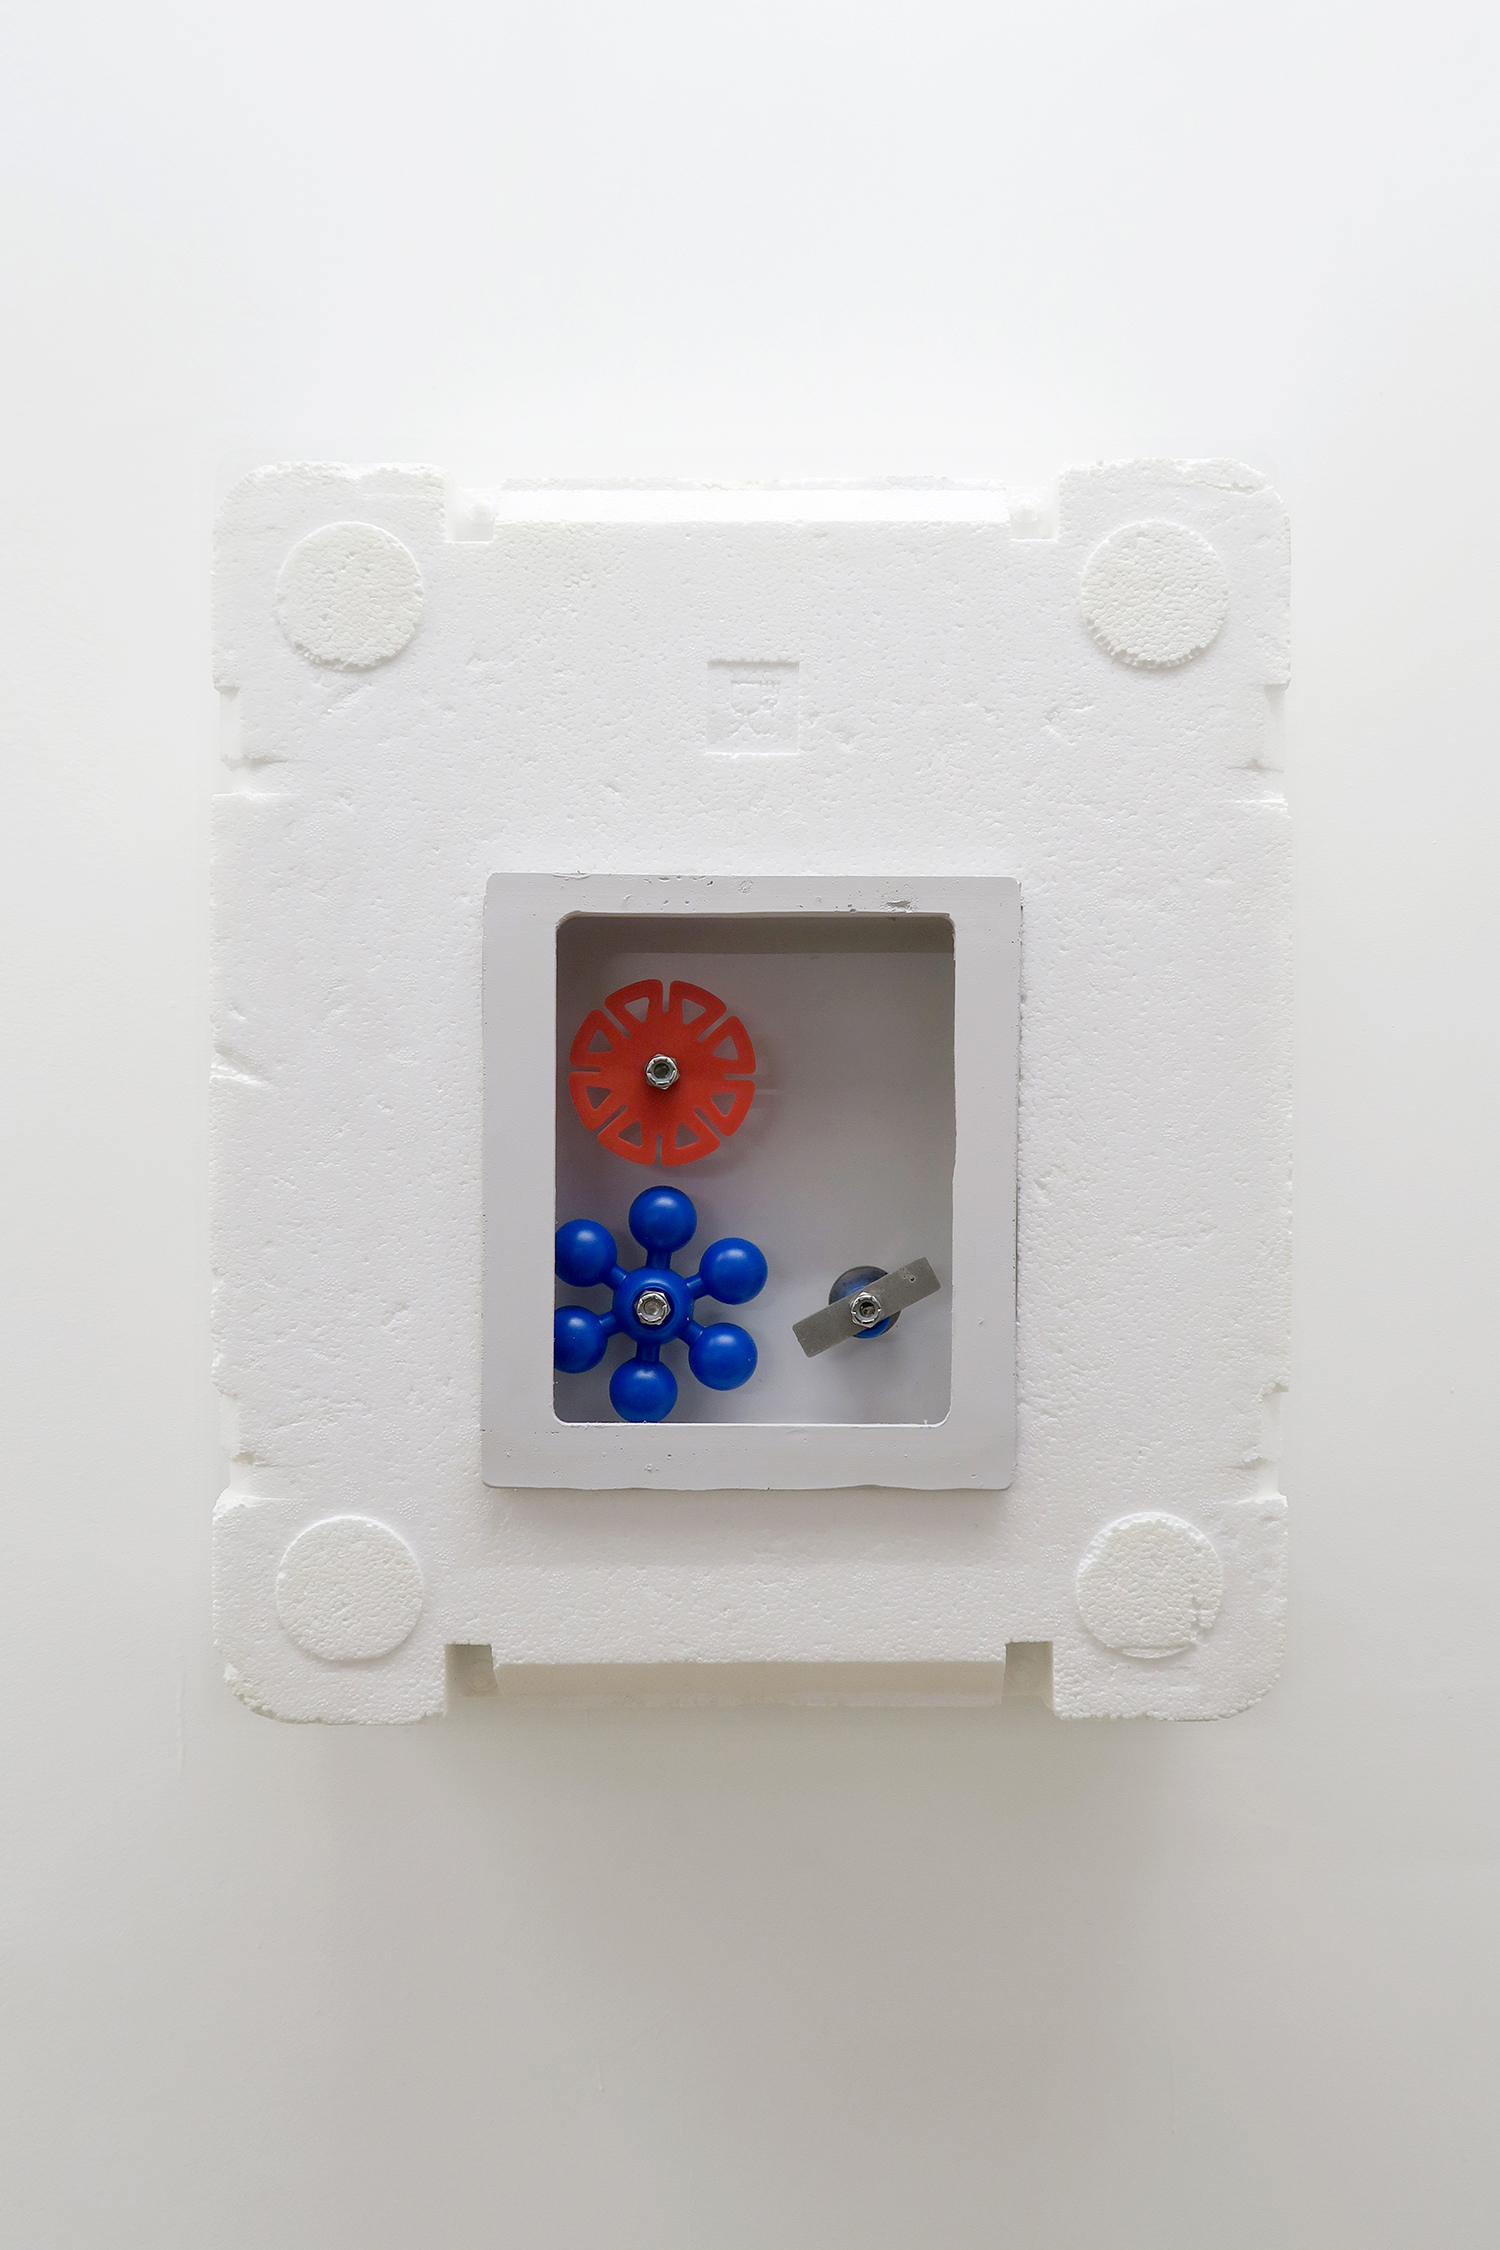 Simplify Complexity IV, 2022 Styrofoam box, brightly colored plastic pieces spin easily on stainless steel rods, 35.5 × 42 × 13.5 cm